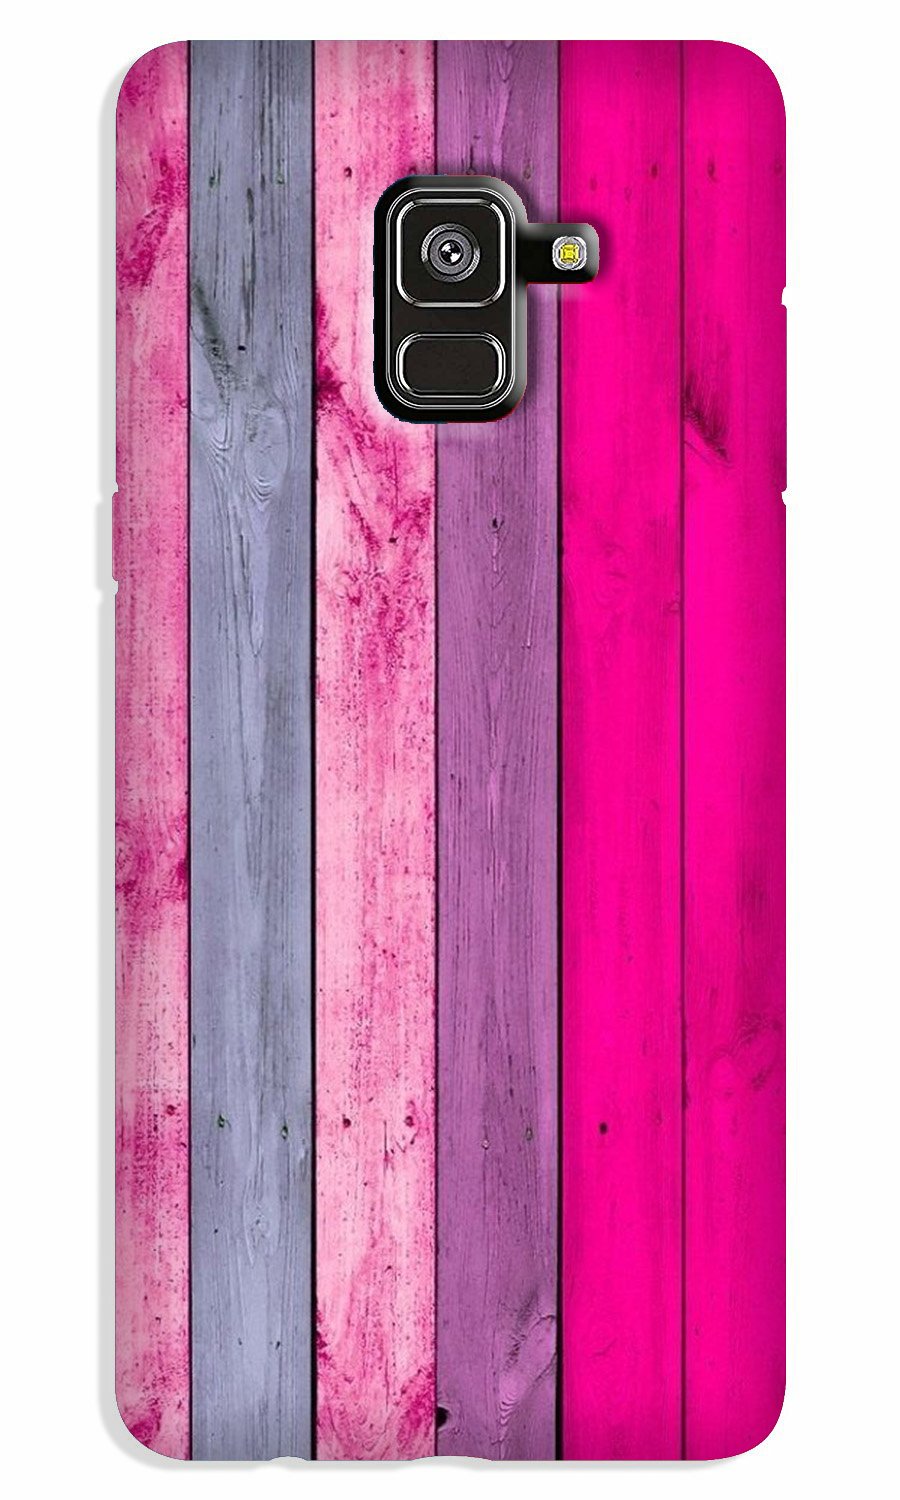 Wooden look Case for Galaxy J6 / On6